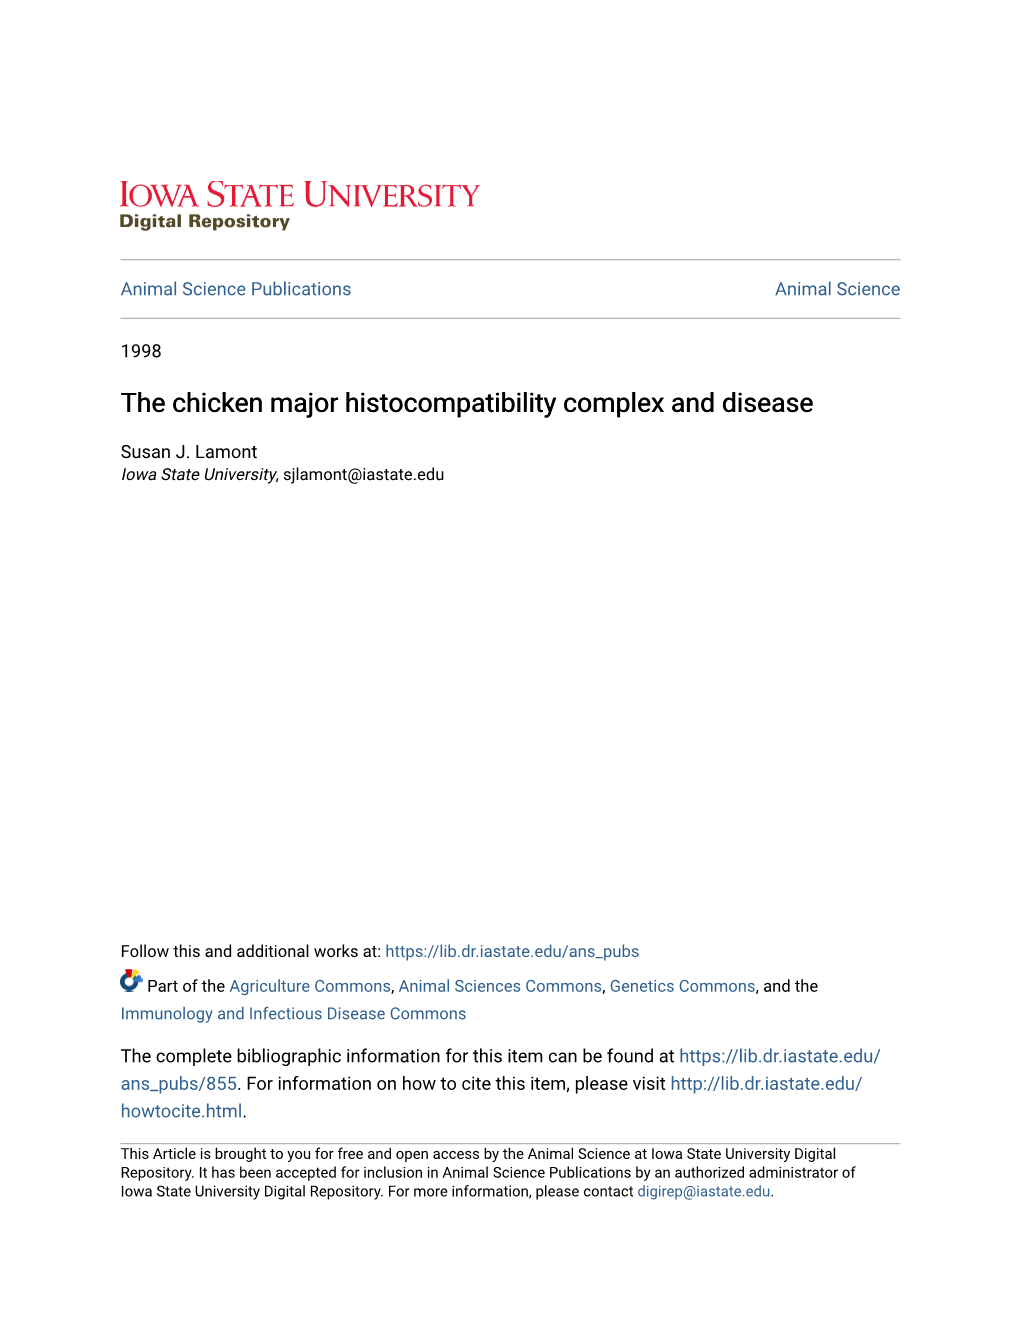 The Chicken Major Histocompatibility Complex and Disease